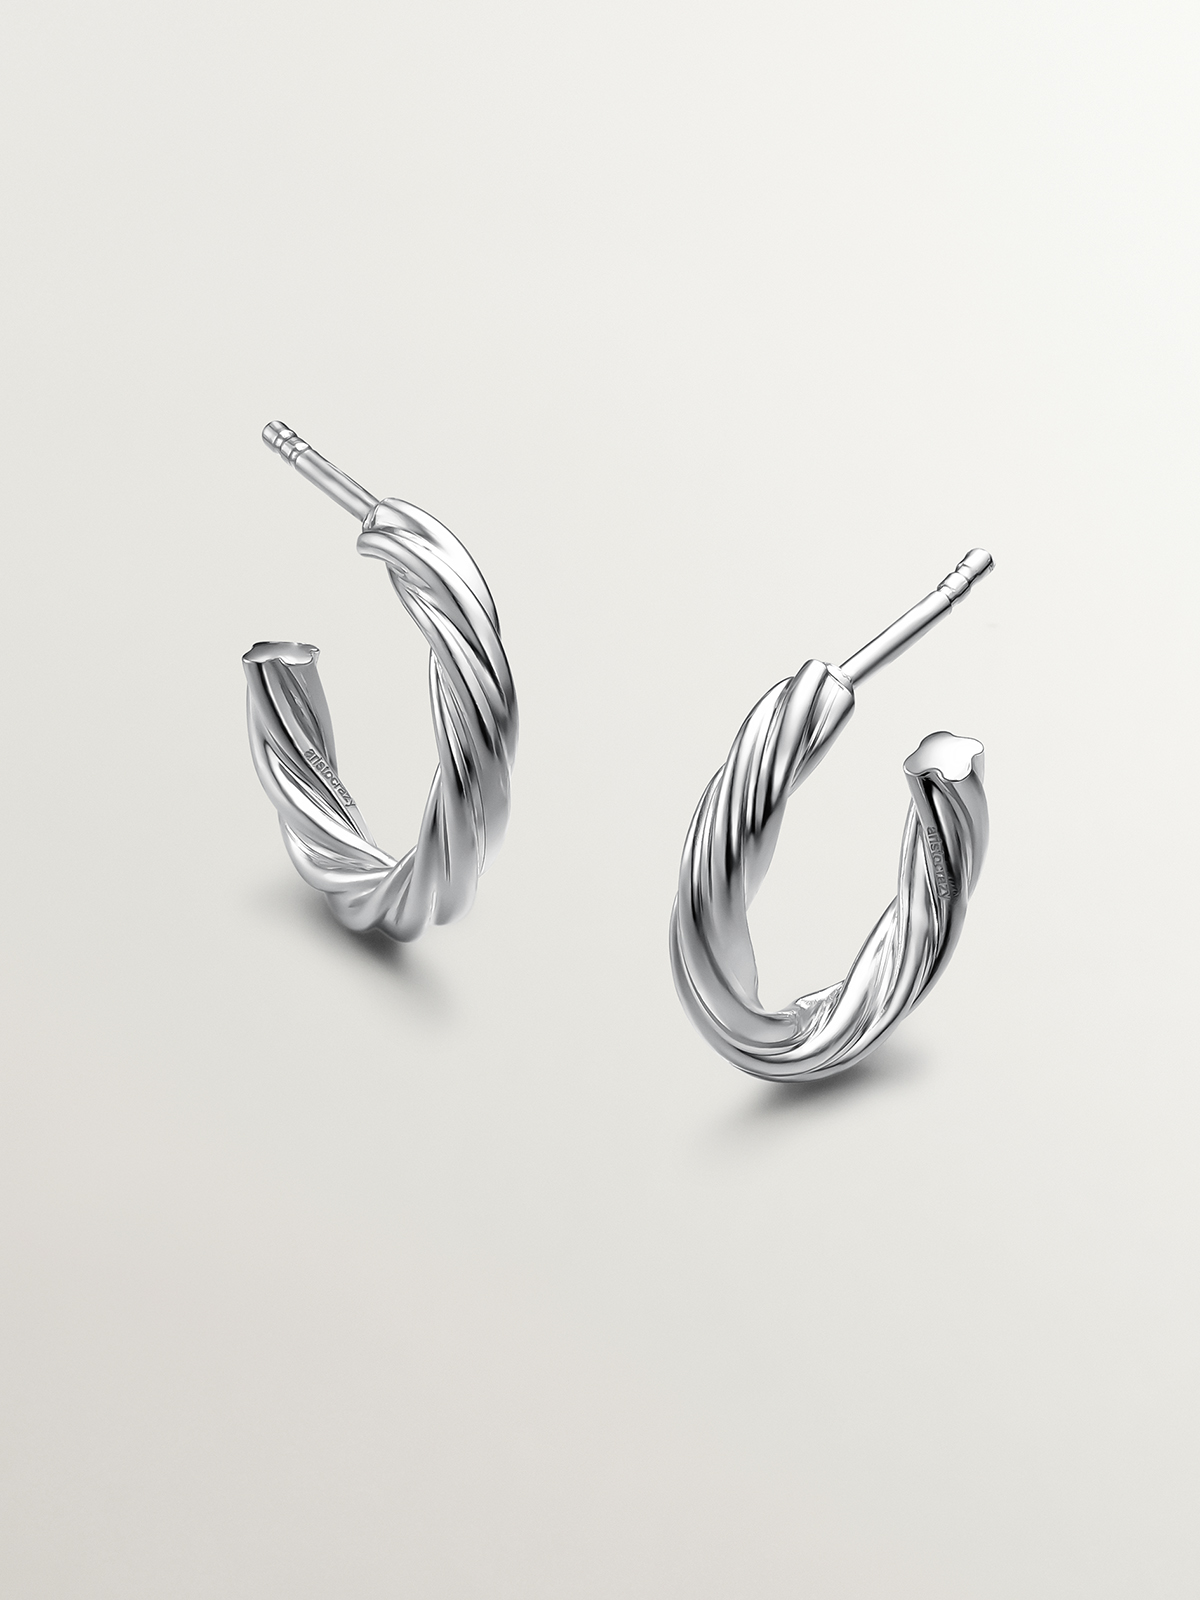 925 Silver hoop earrings with gallooned finish.